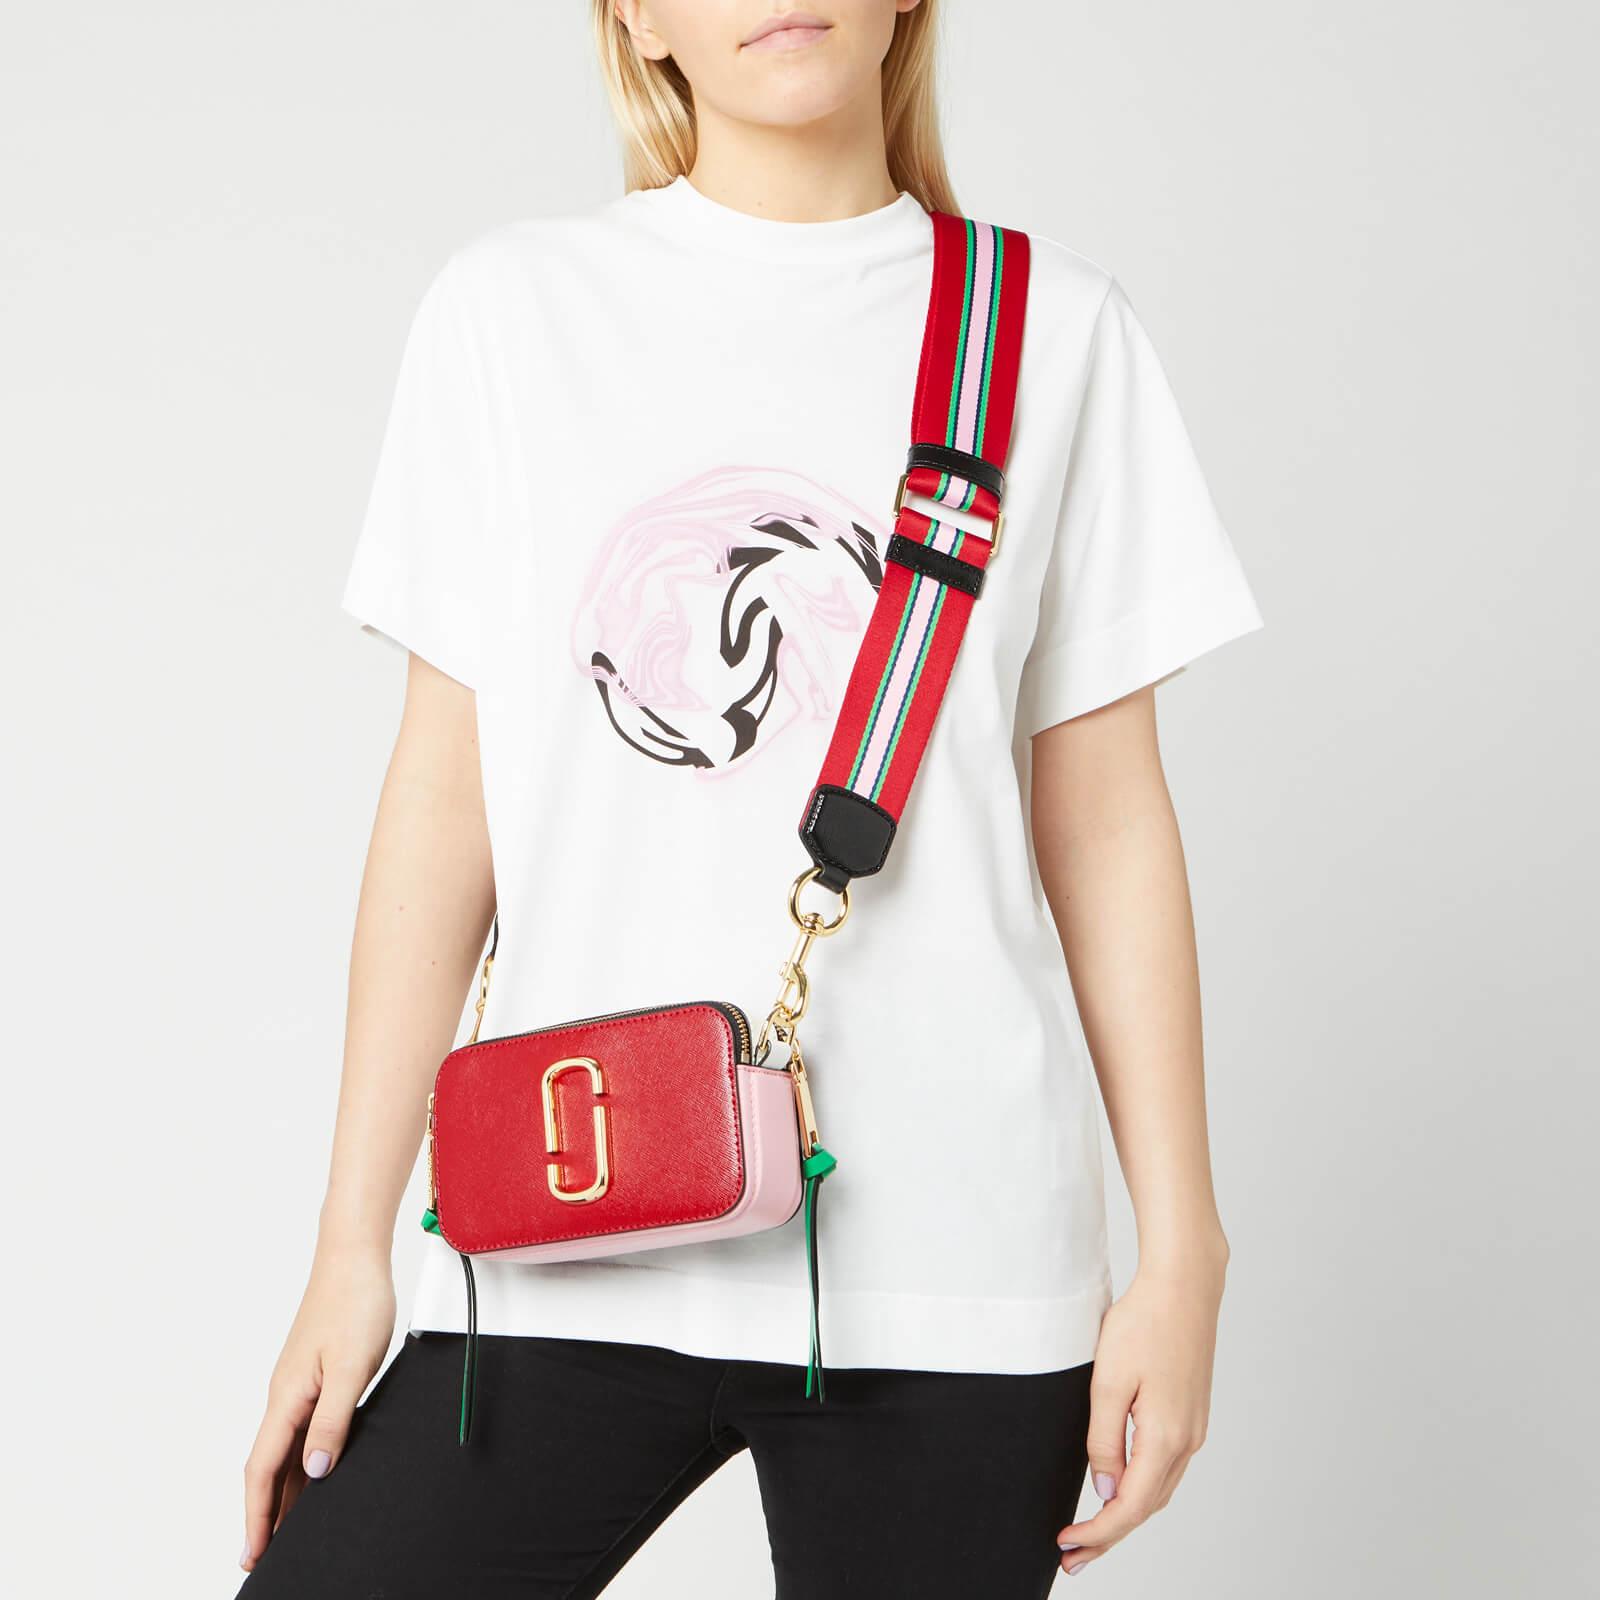 Marc Jacobs red The Marc Jacobs Snapshot Cross-Body Bag